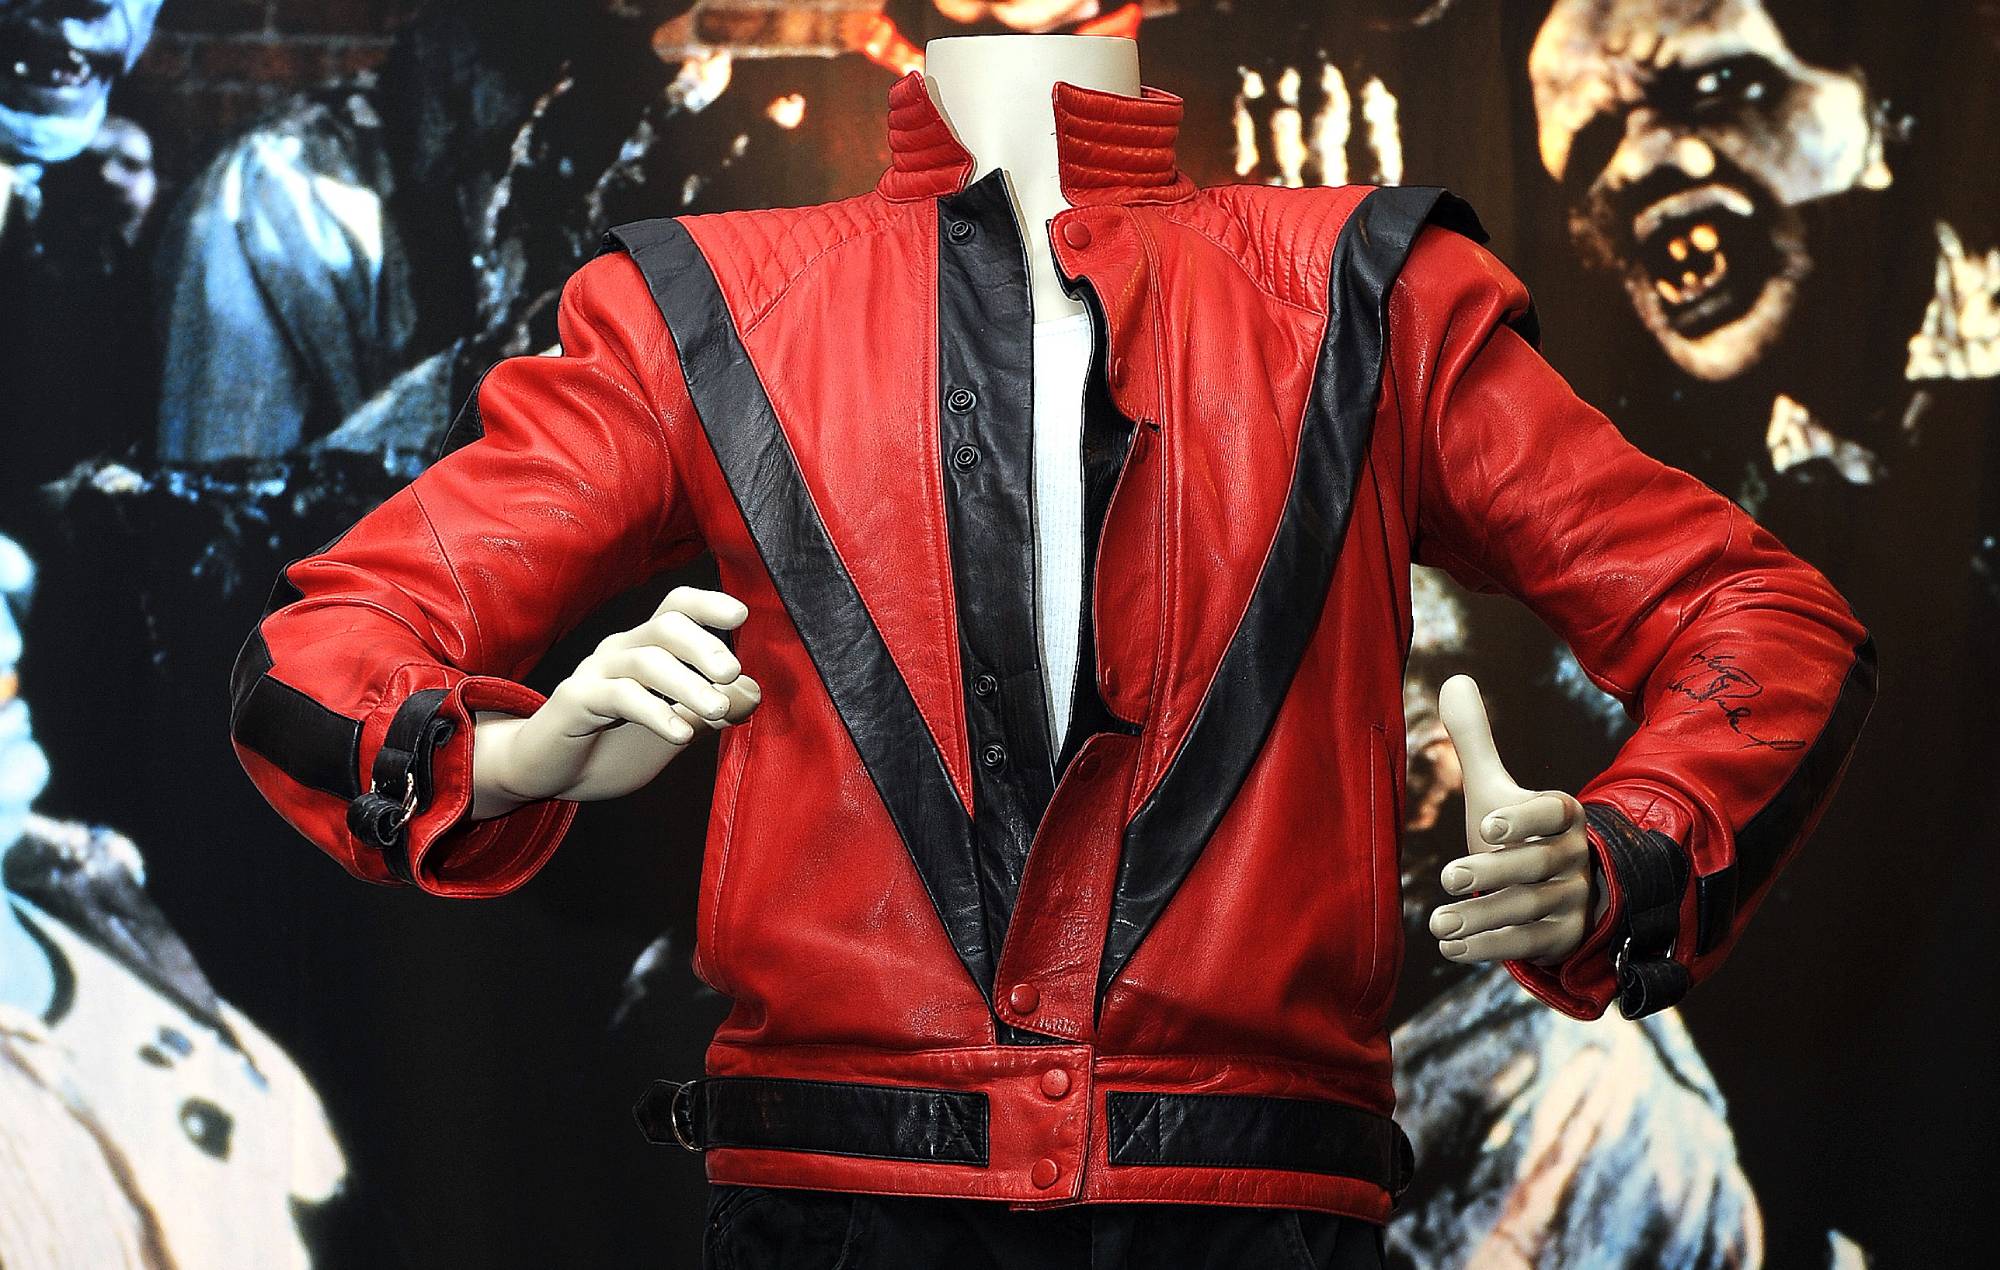 One of Michael Jackson’s iconic ‘Thriller’ jackets is up for auction